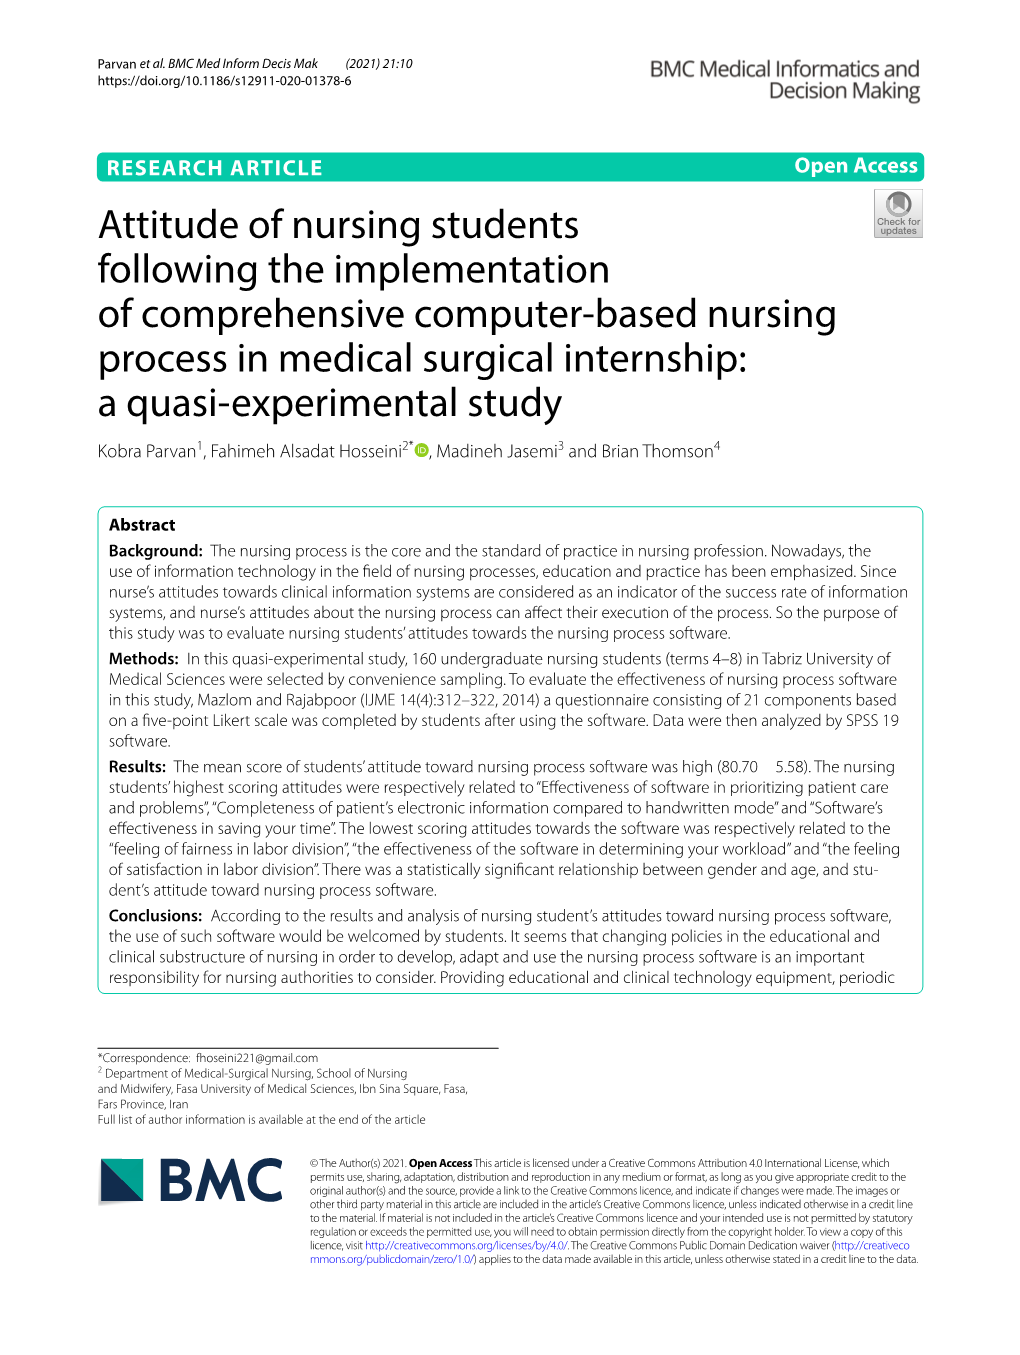 Attitude of Nursing Students Following the Implementation Of